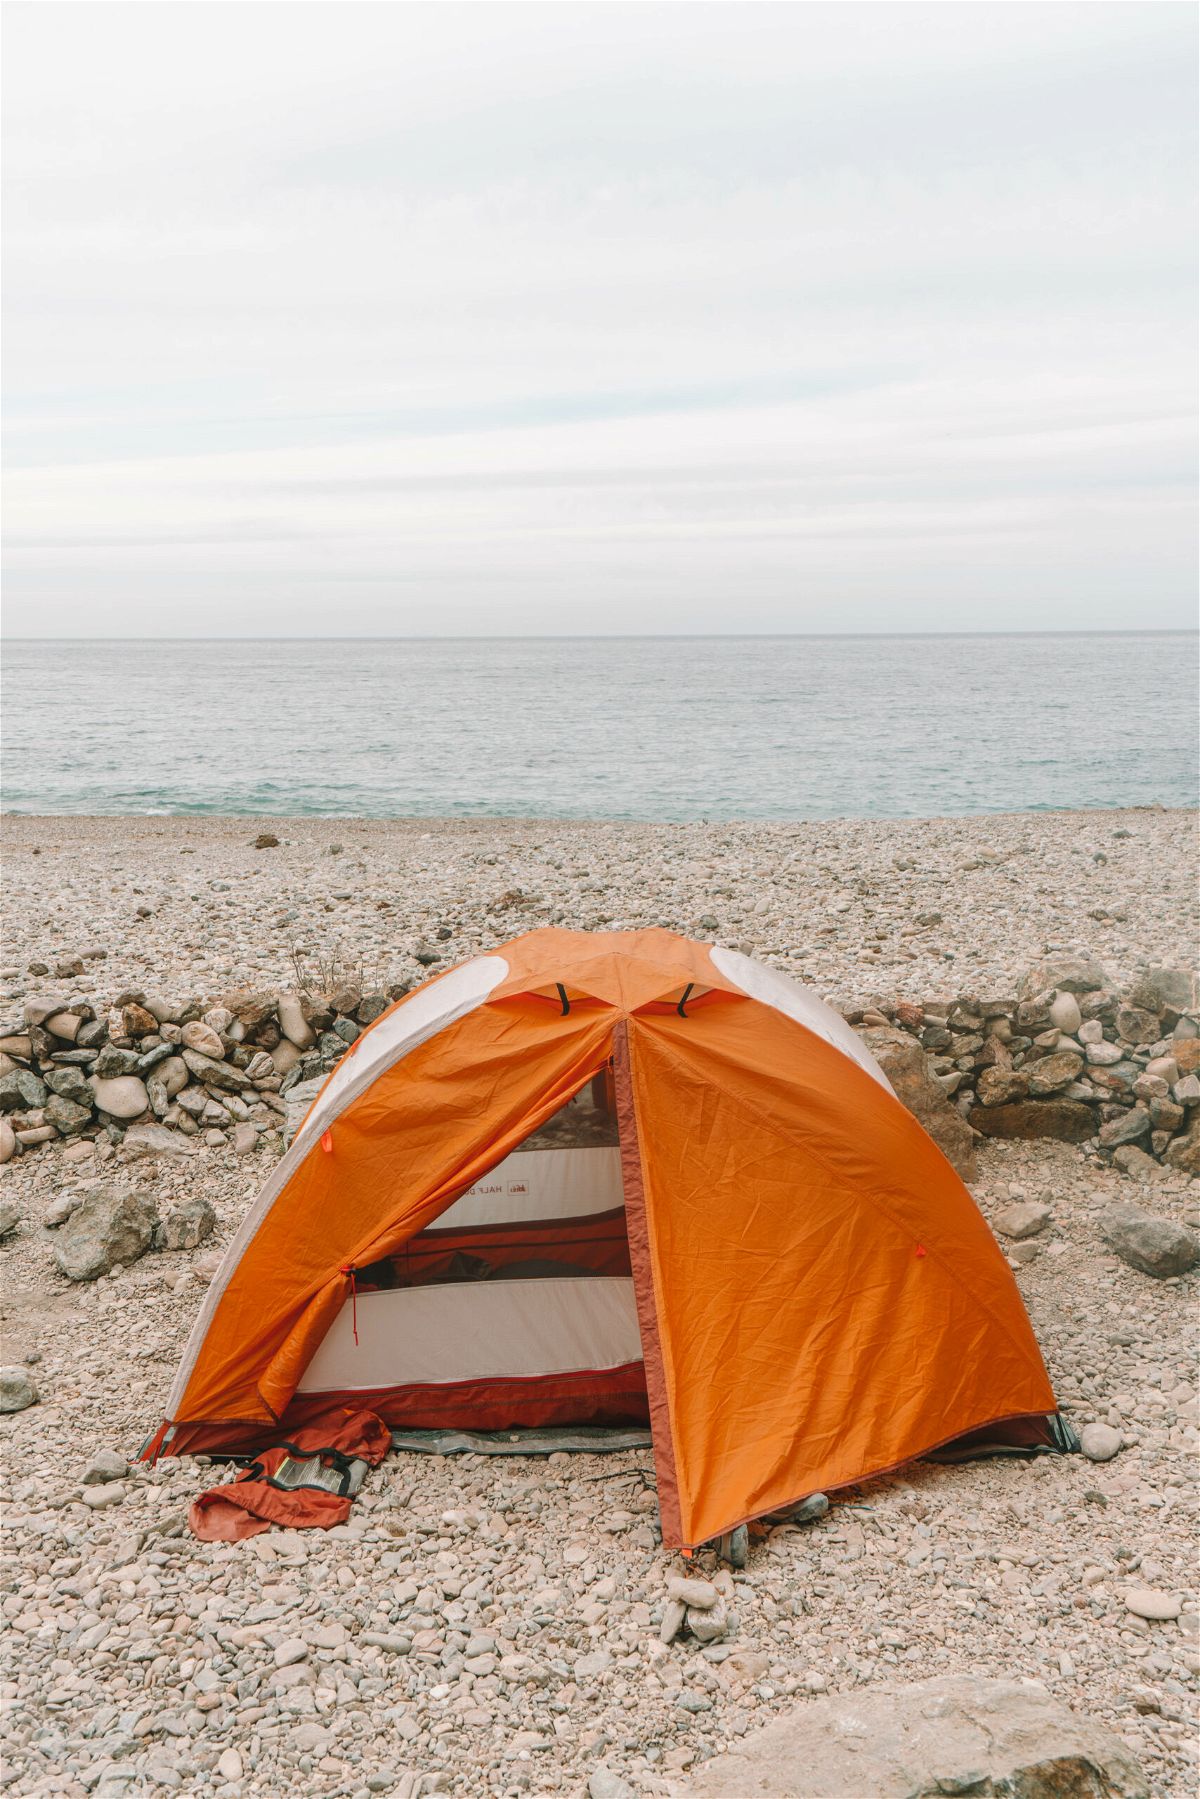 An orange and white dome tent set up on a rocky beach in front of the ocean.